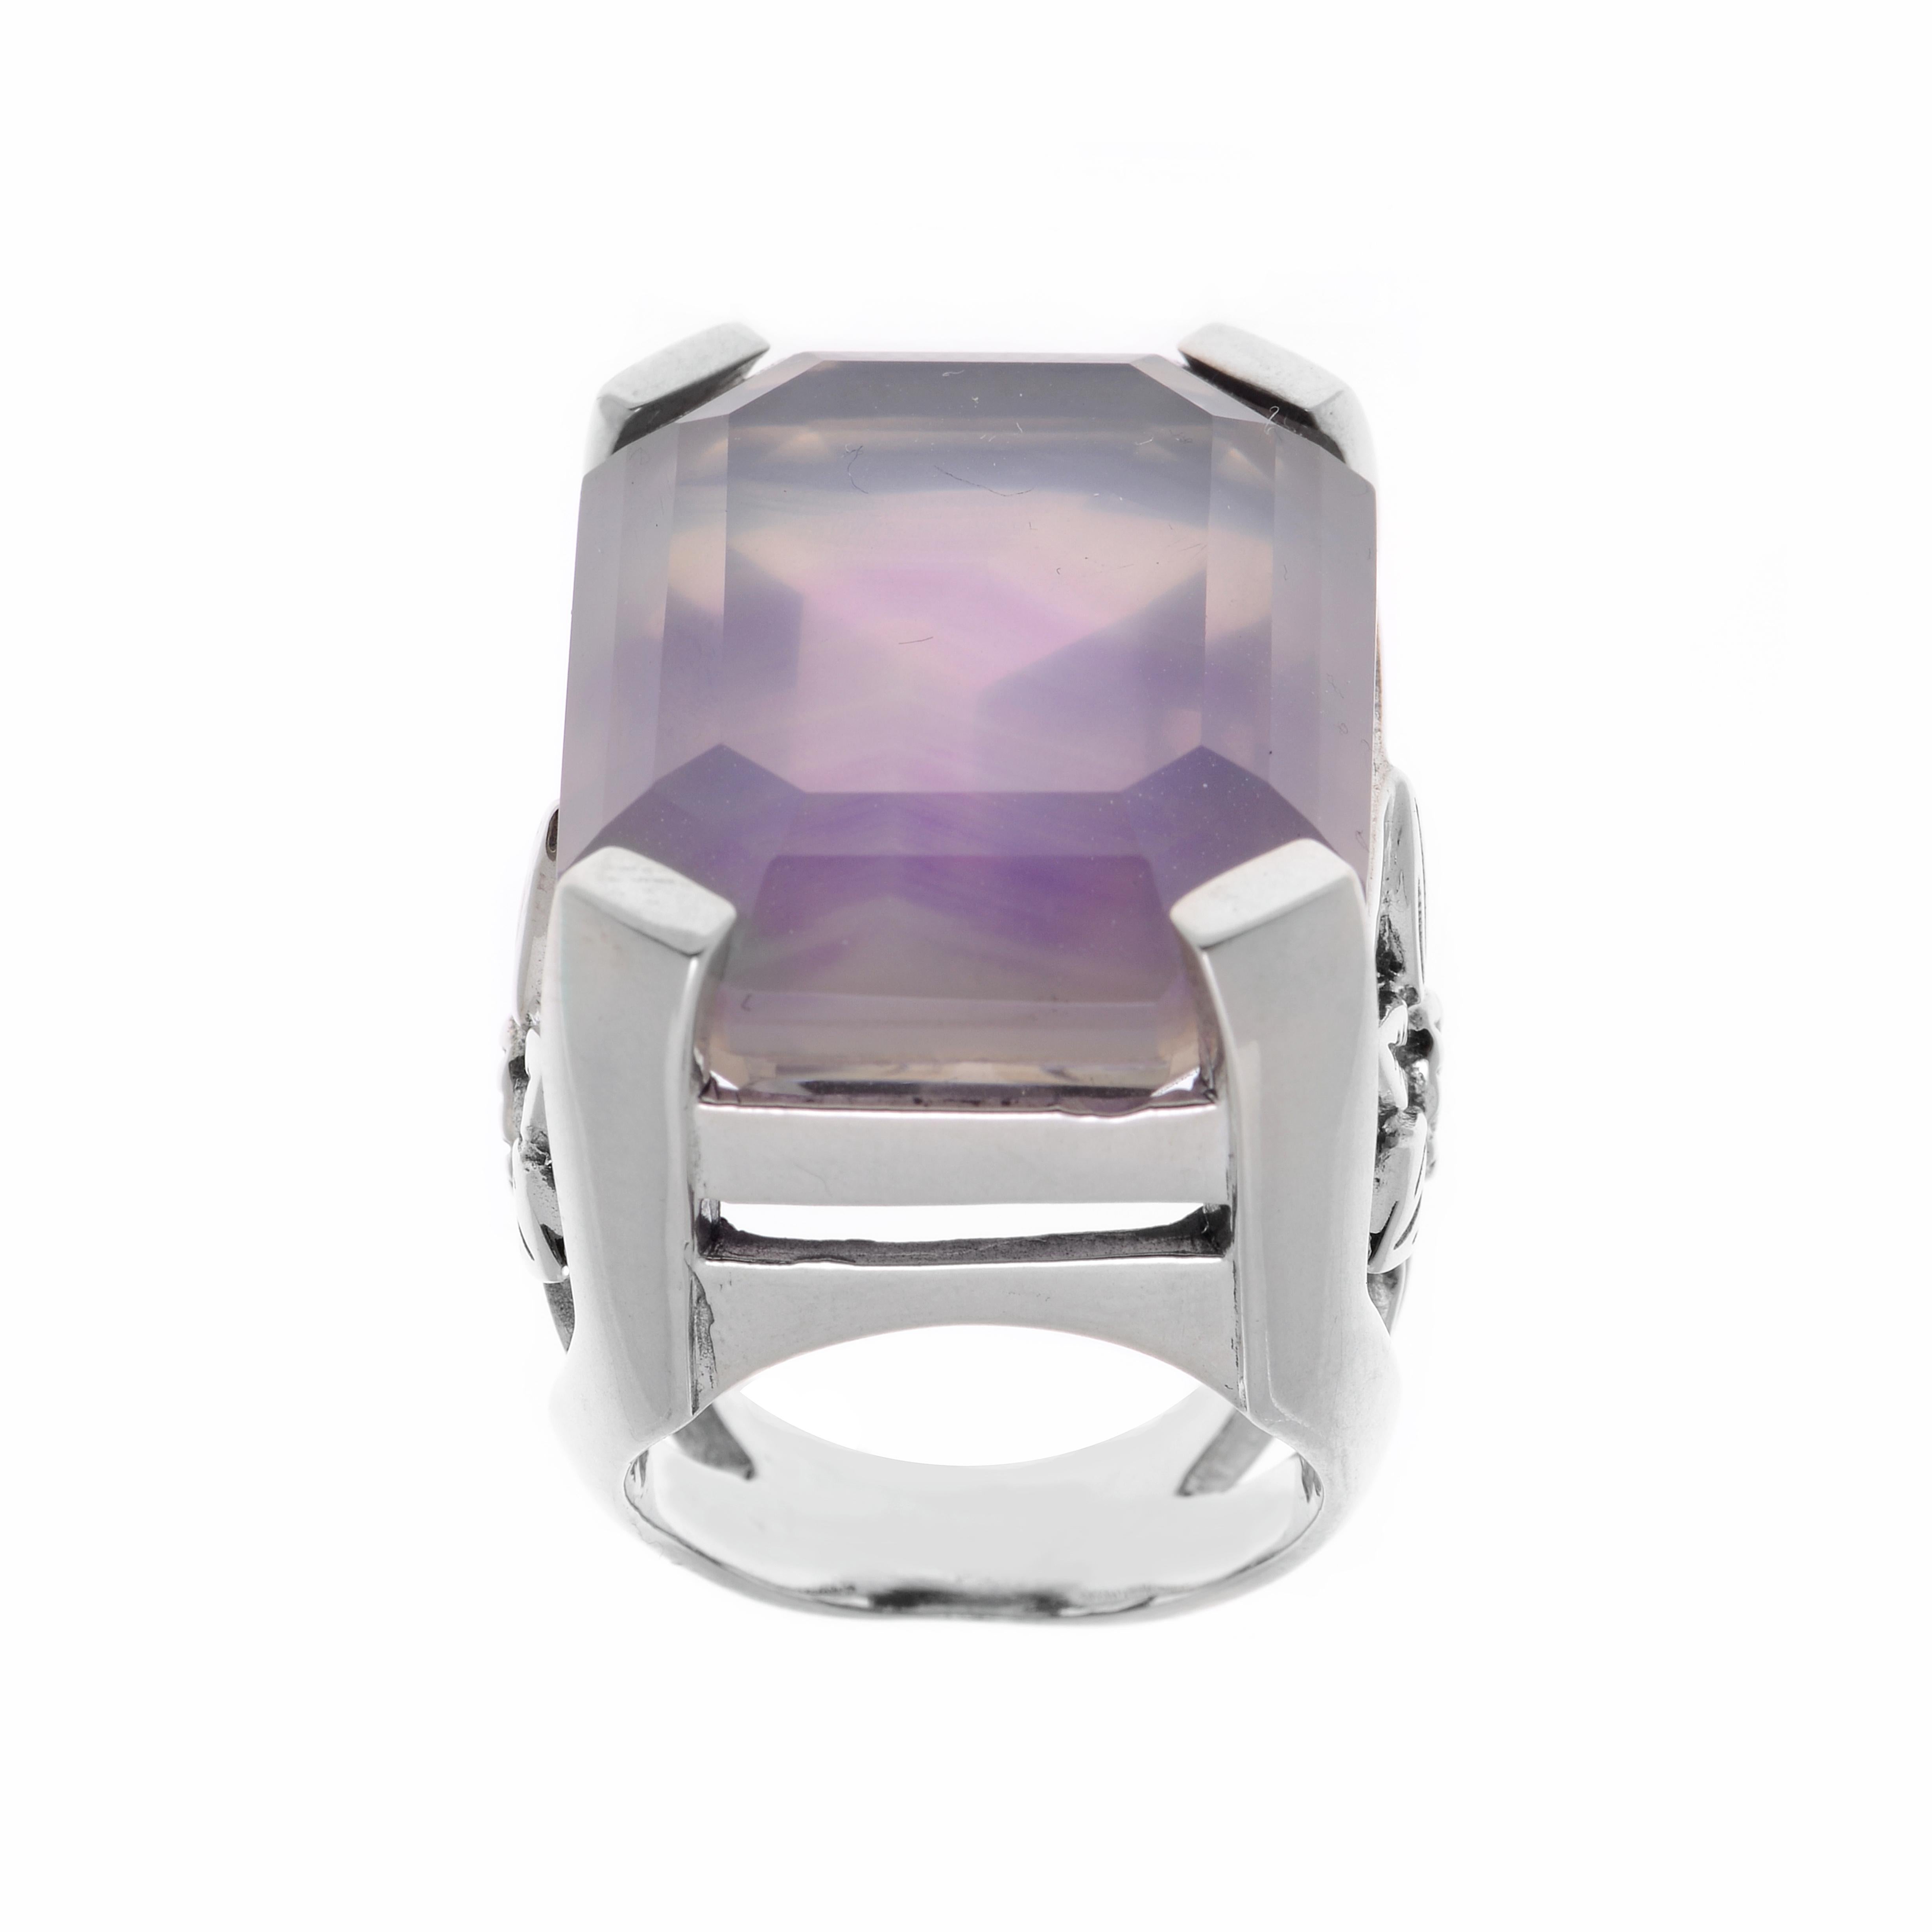 This spectacular Stephen Dweck Sterling Silver Statement Ring features a luscious concave Natural Quartz and Purple Agate Doublet held by a sterling silver basket with carved floral detail. The ring size is 6 (51.9). The Decoration Size is 27mm x